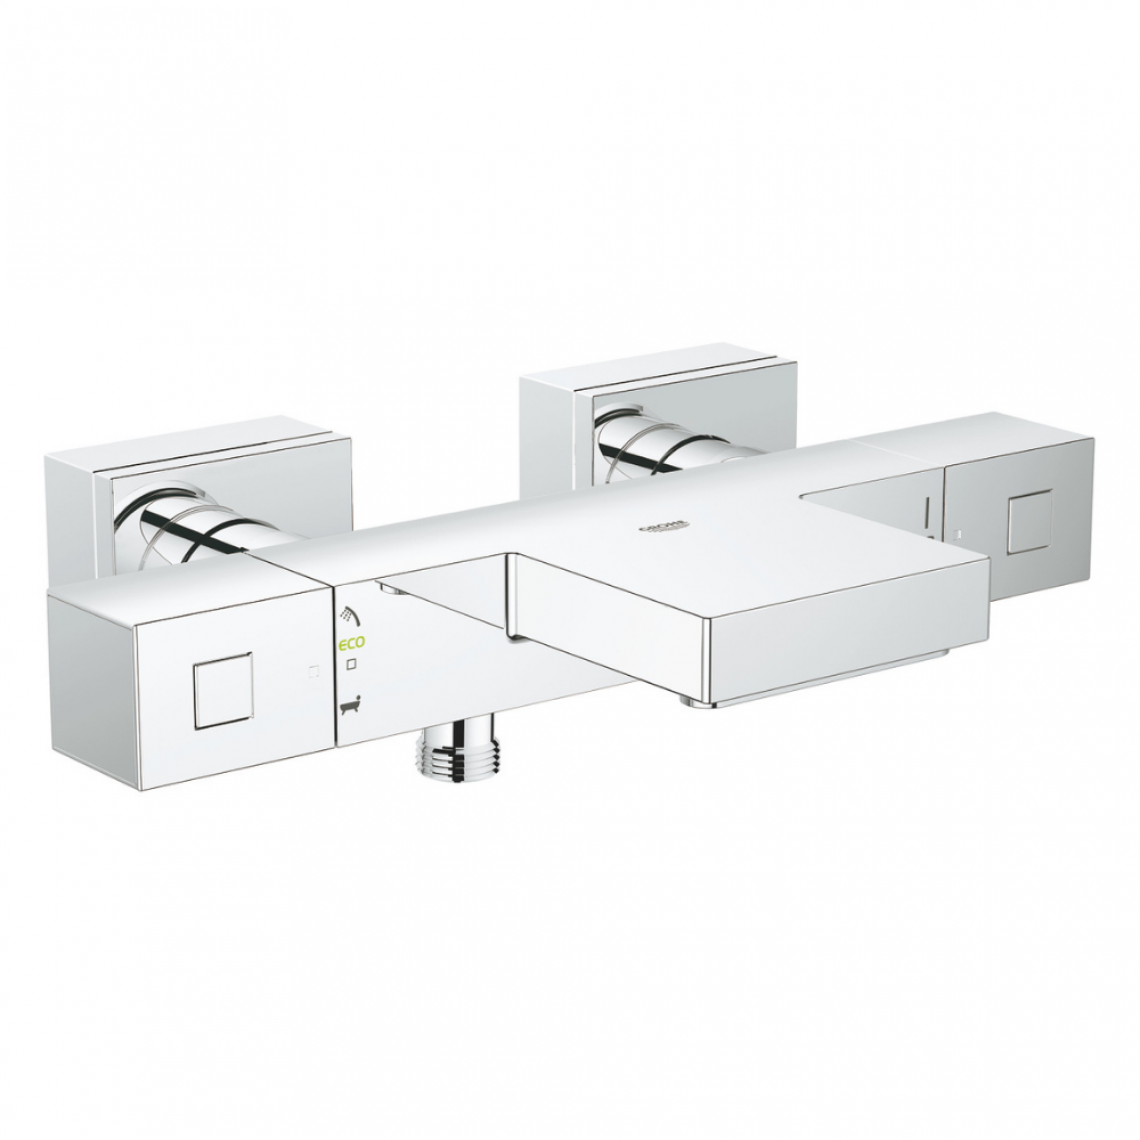 Grohe - Grohe - Mitigeur bain-douche thermostatique Grohtherm cube - Mitigeur douche